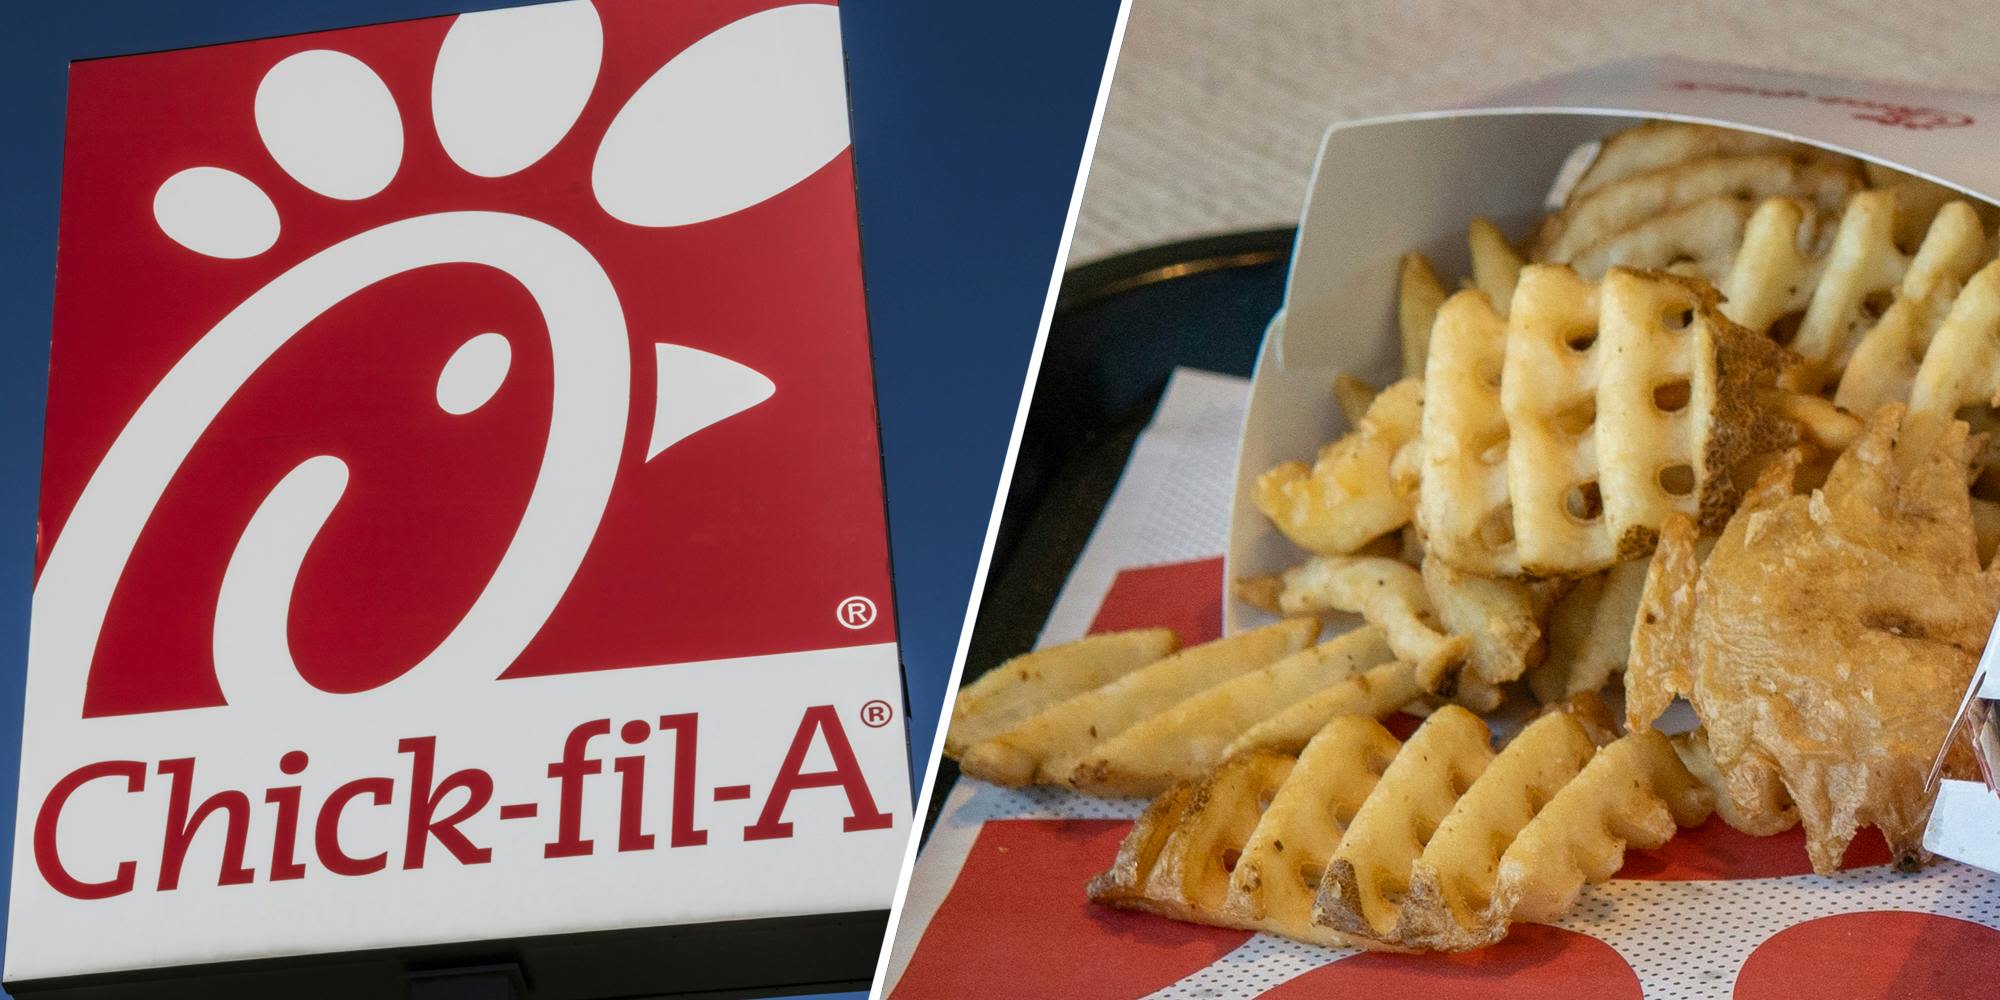 ‘I LEAVE AMERICA FOR 2 WEEKS AND THIS HAPPENS’: Customer freaks out over Chick-fil-A waffle fries changing